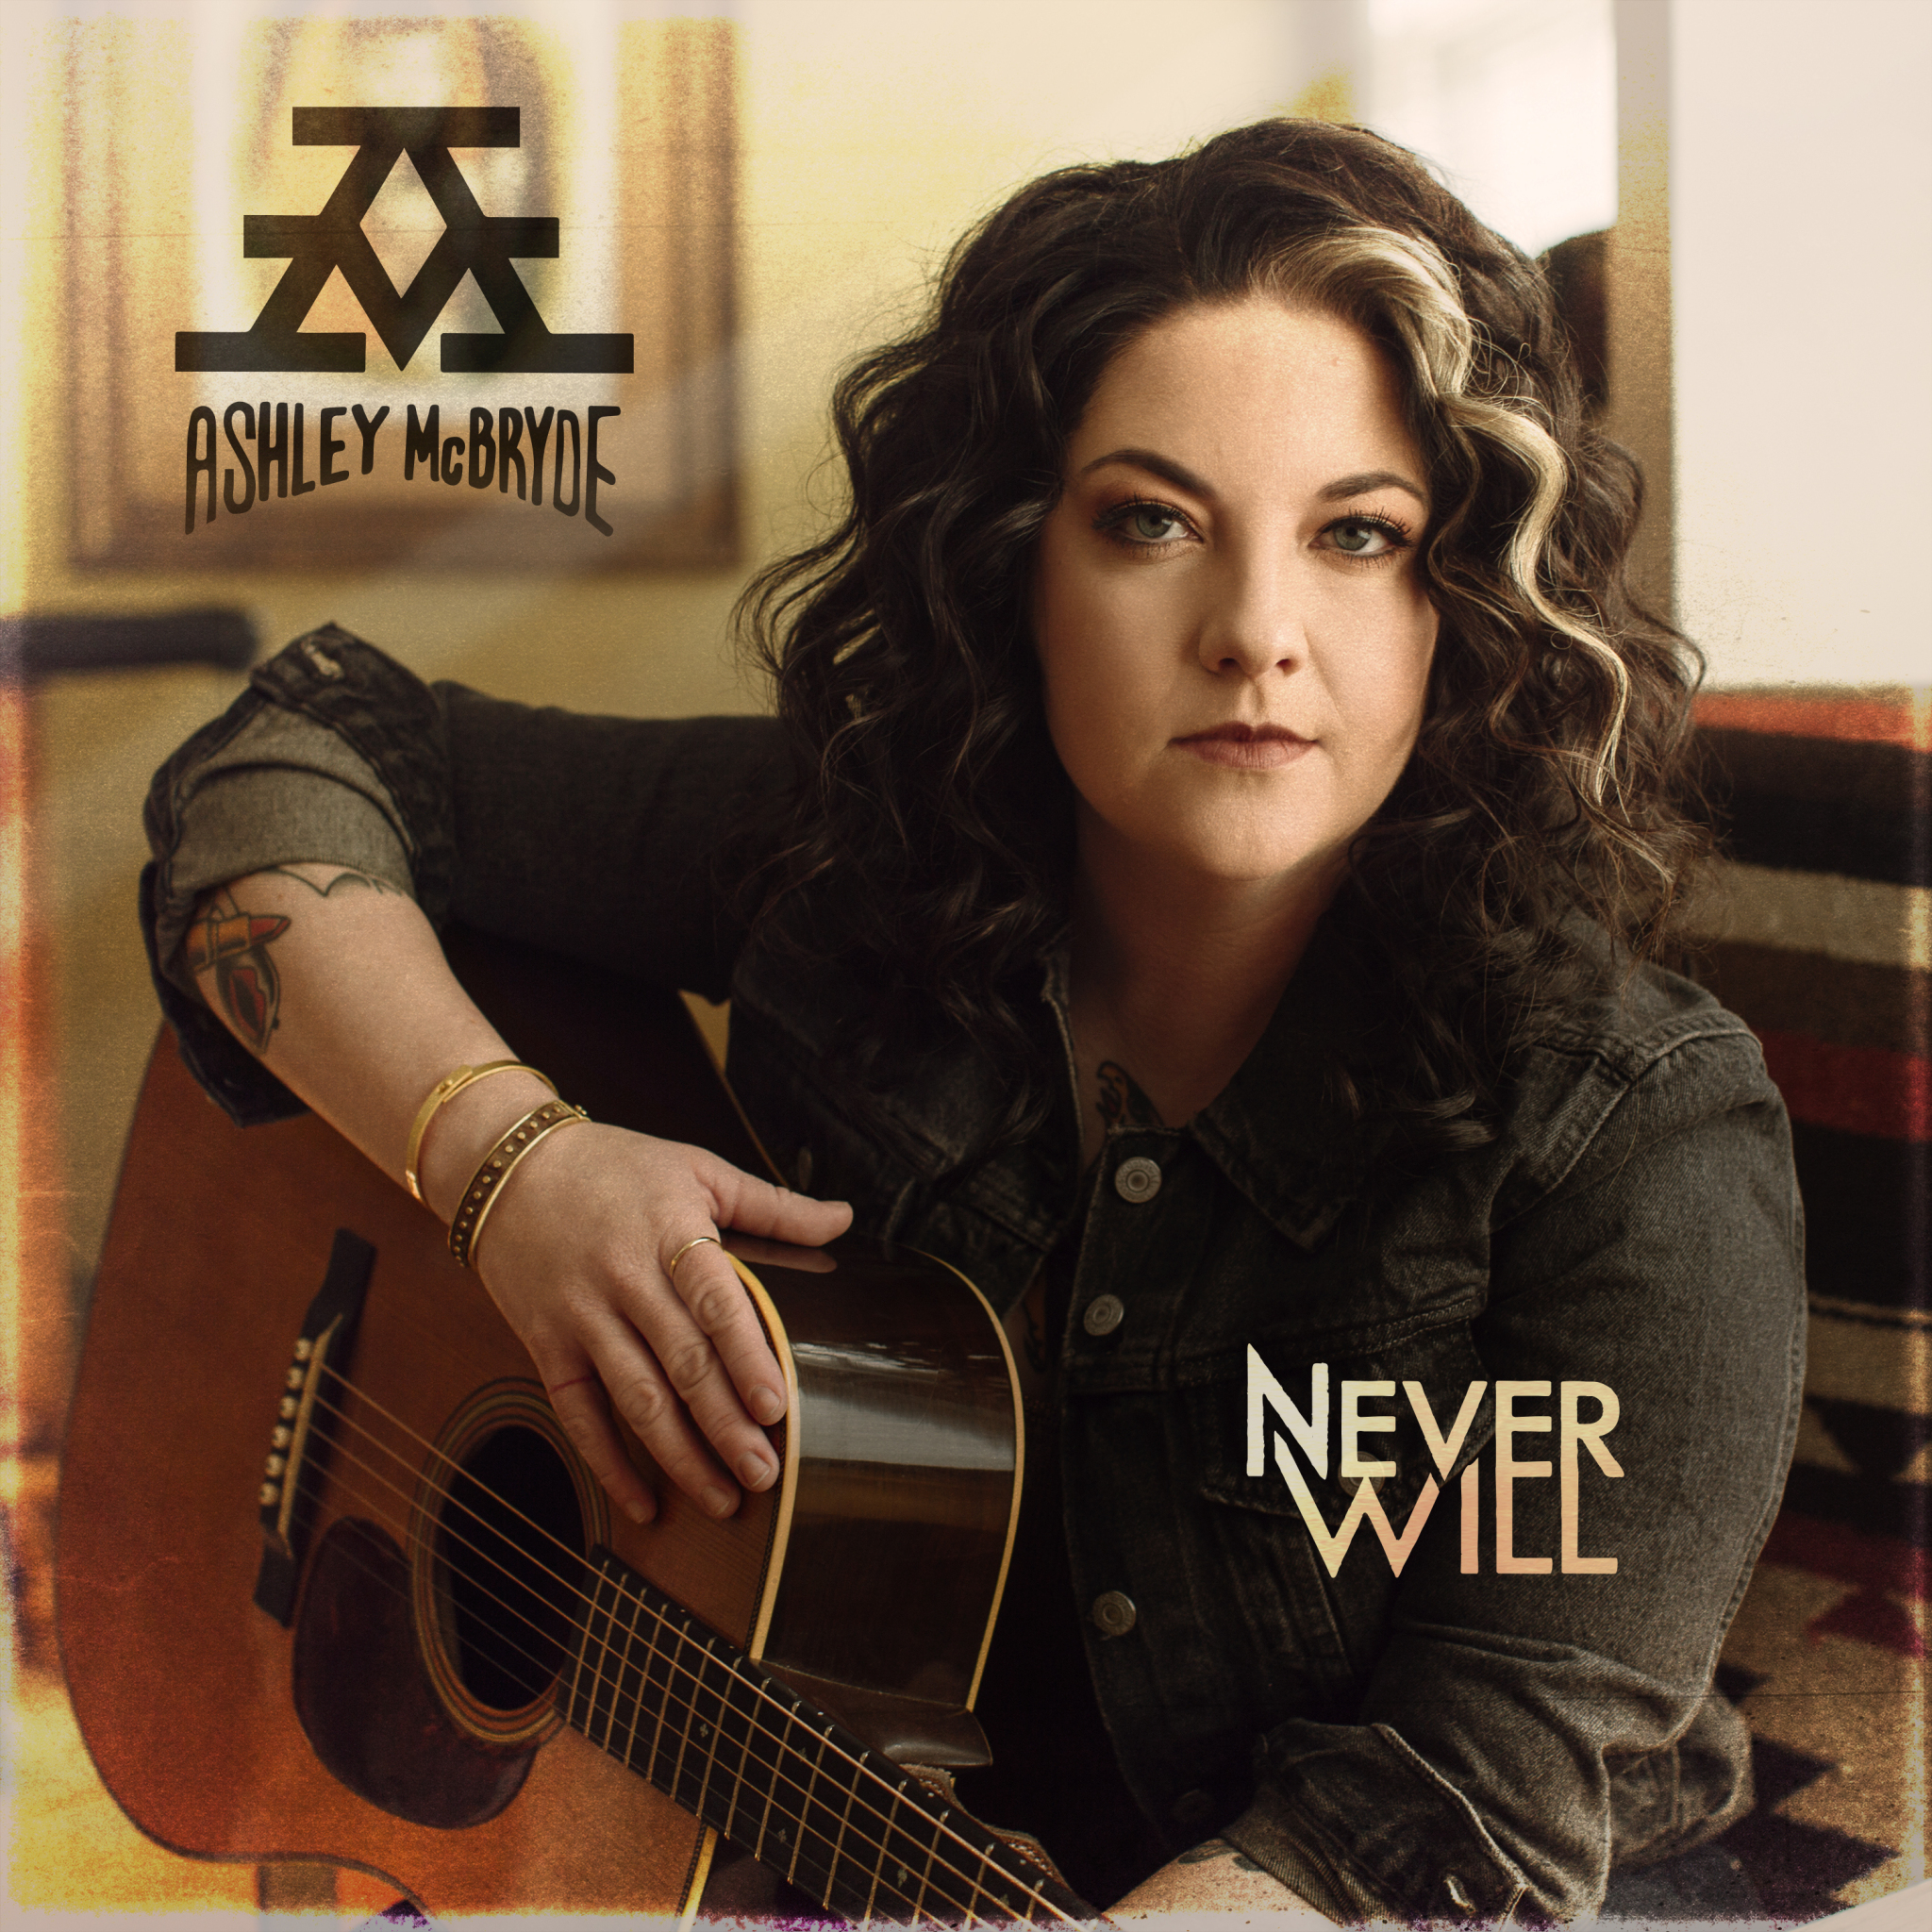 Ashley McBryde's "Never Will" Receives GRAMMY Nomination for Best Country Album